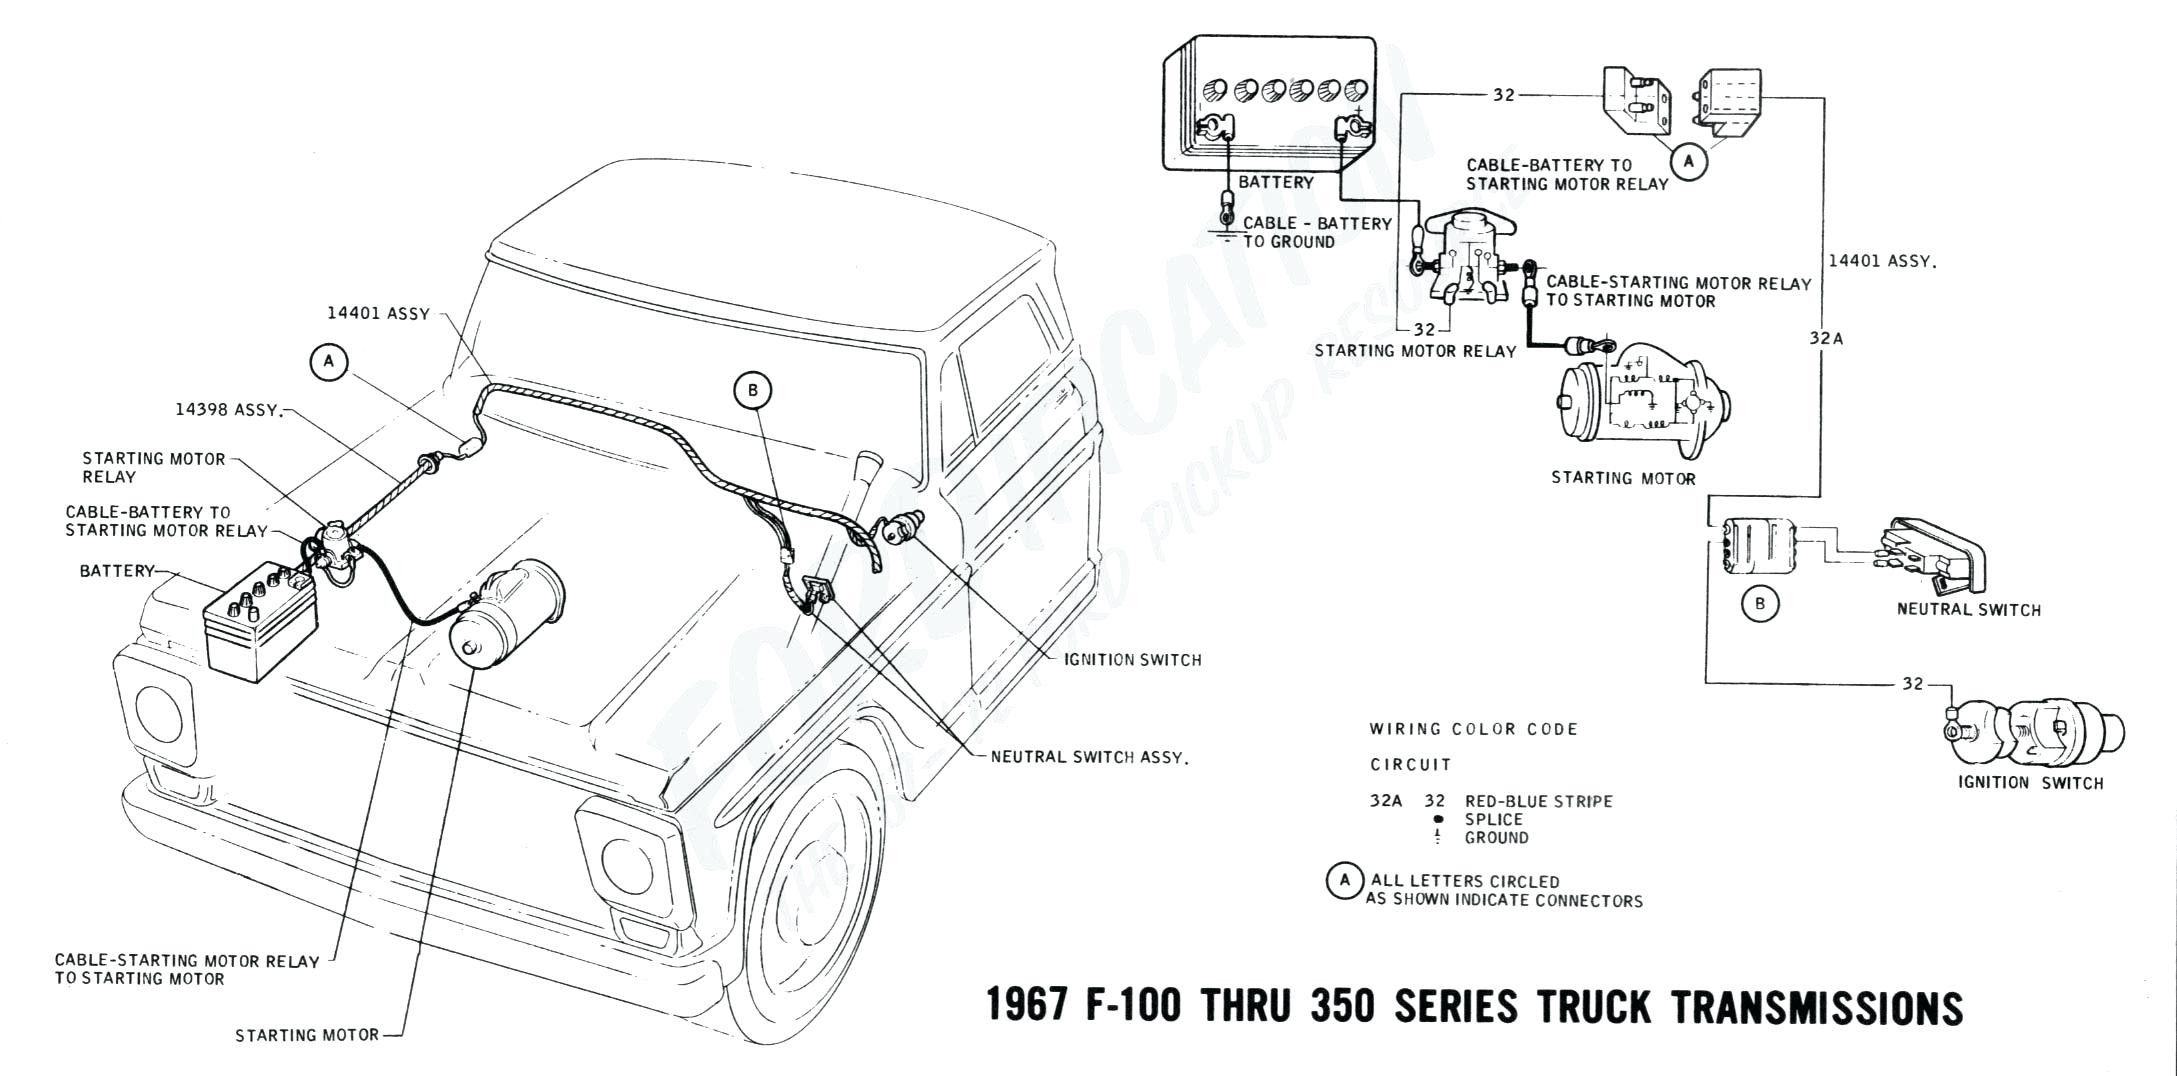 Starter Solenoid Wiring Diagram Ford from mainetreasurechest.com